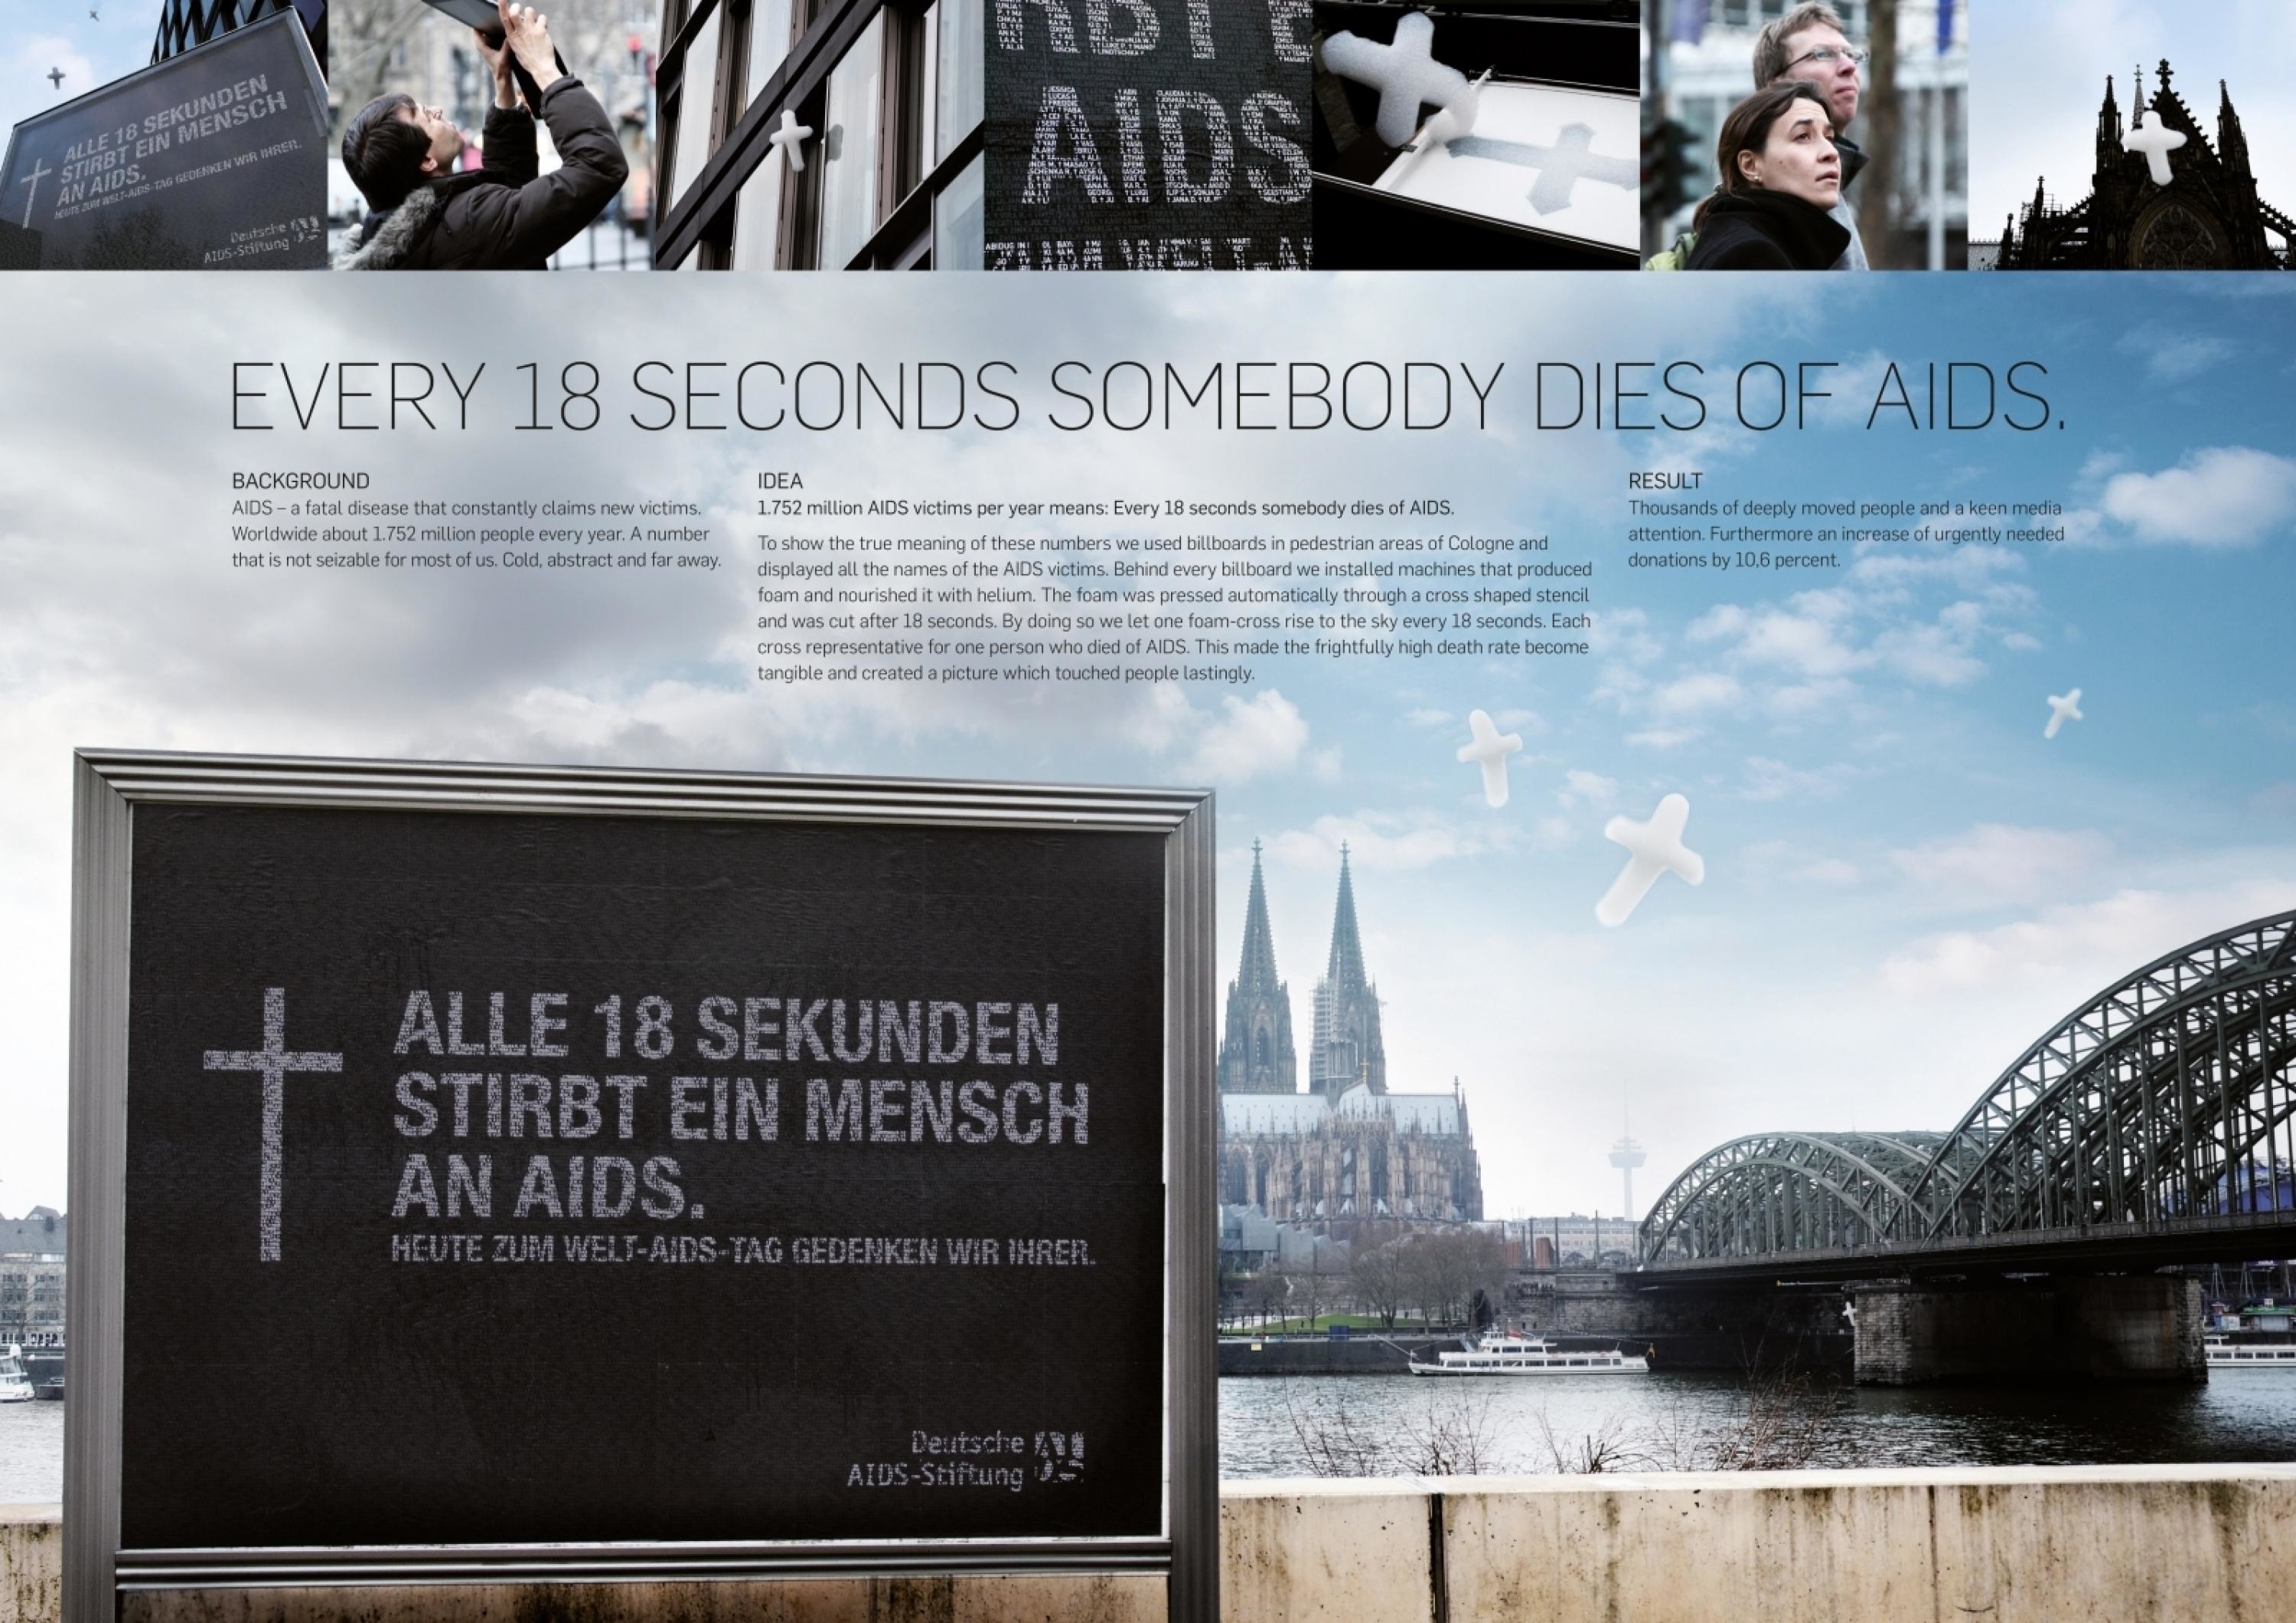 EVERY 18 SECONDS SOMEBODY DIES OF AIDS